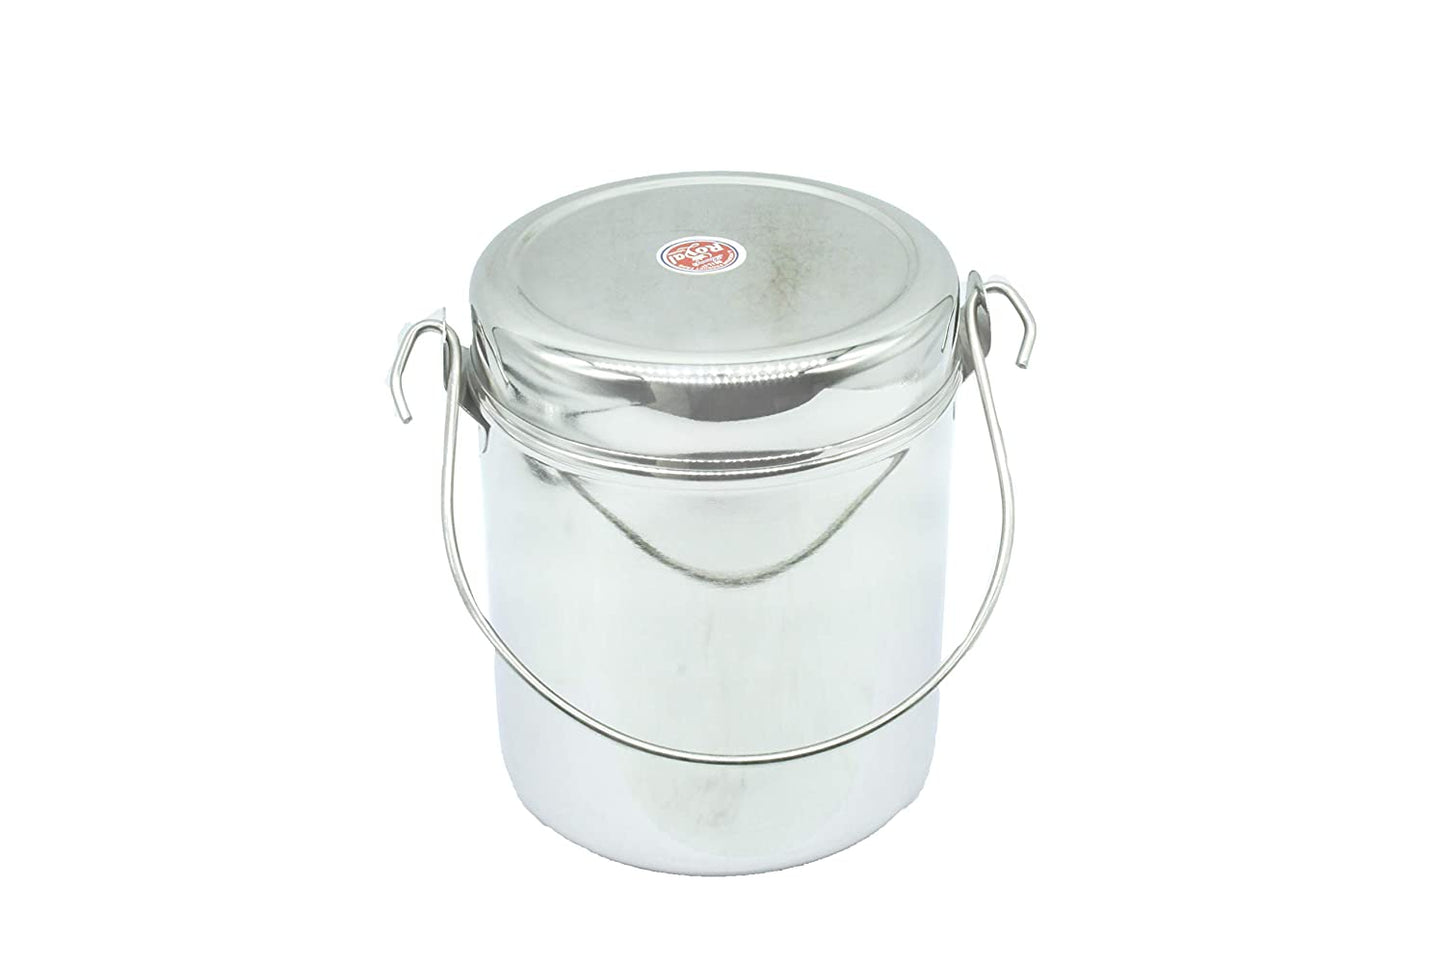 Stainless Steel Royal Milk Pot | Thukku | Container Set Of 2 Pcs (14cm & 15cm)